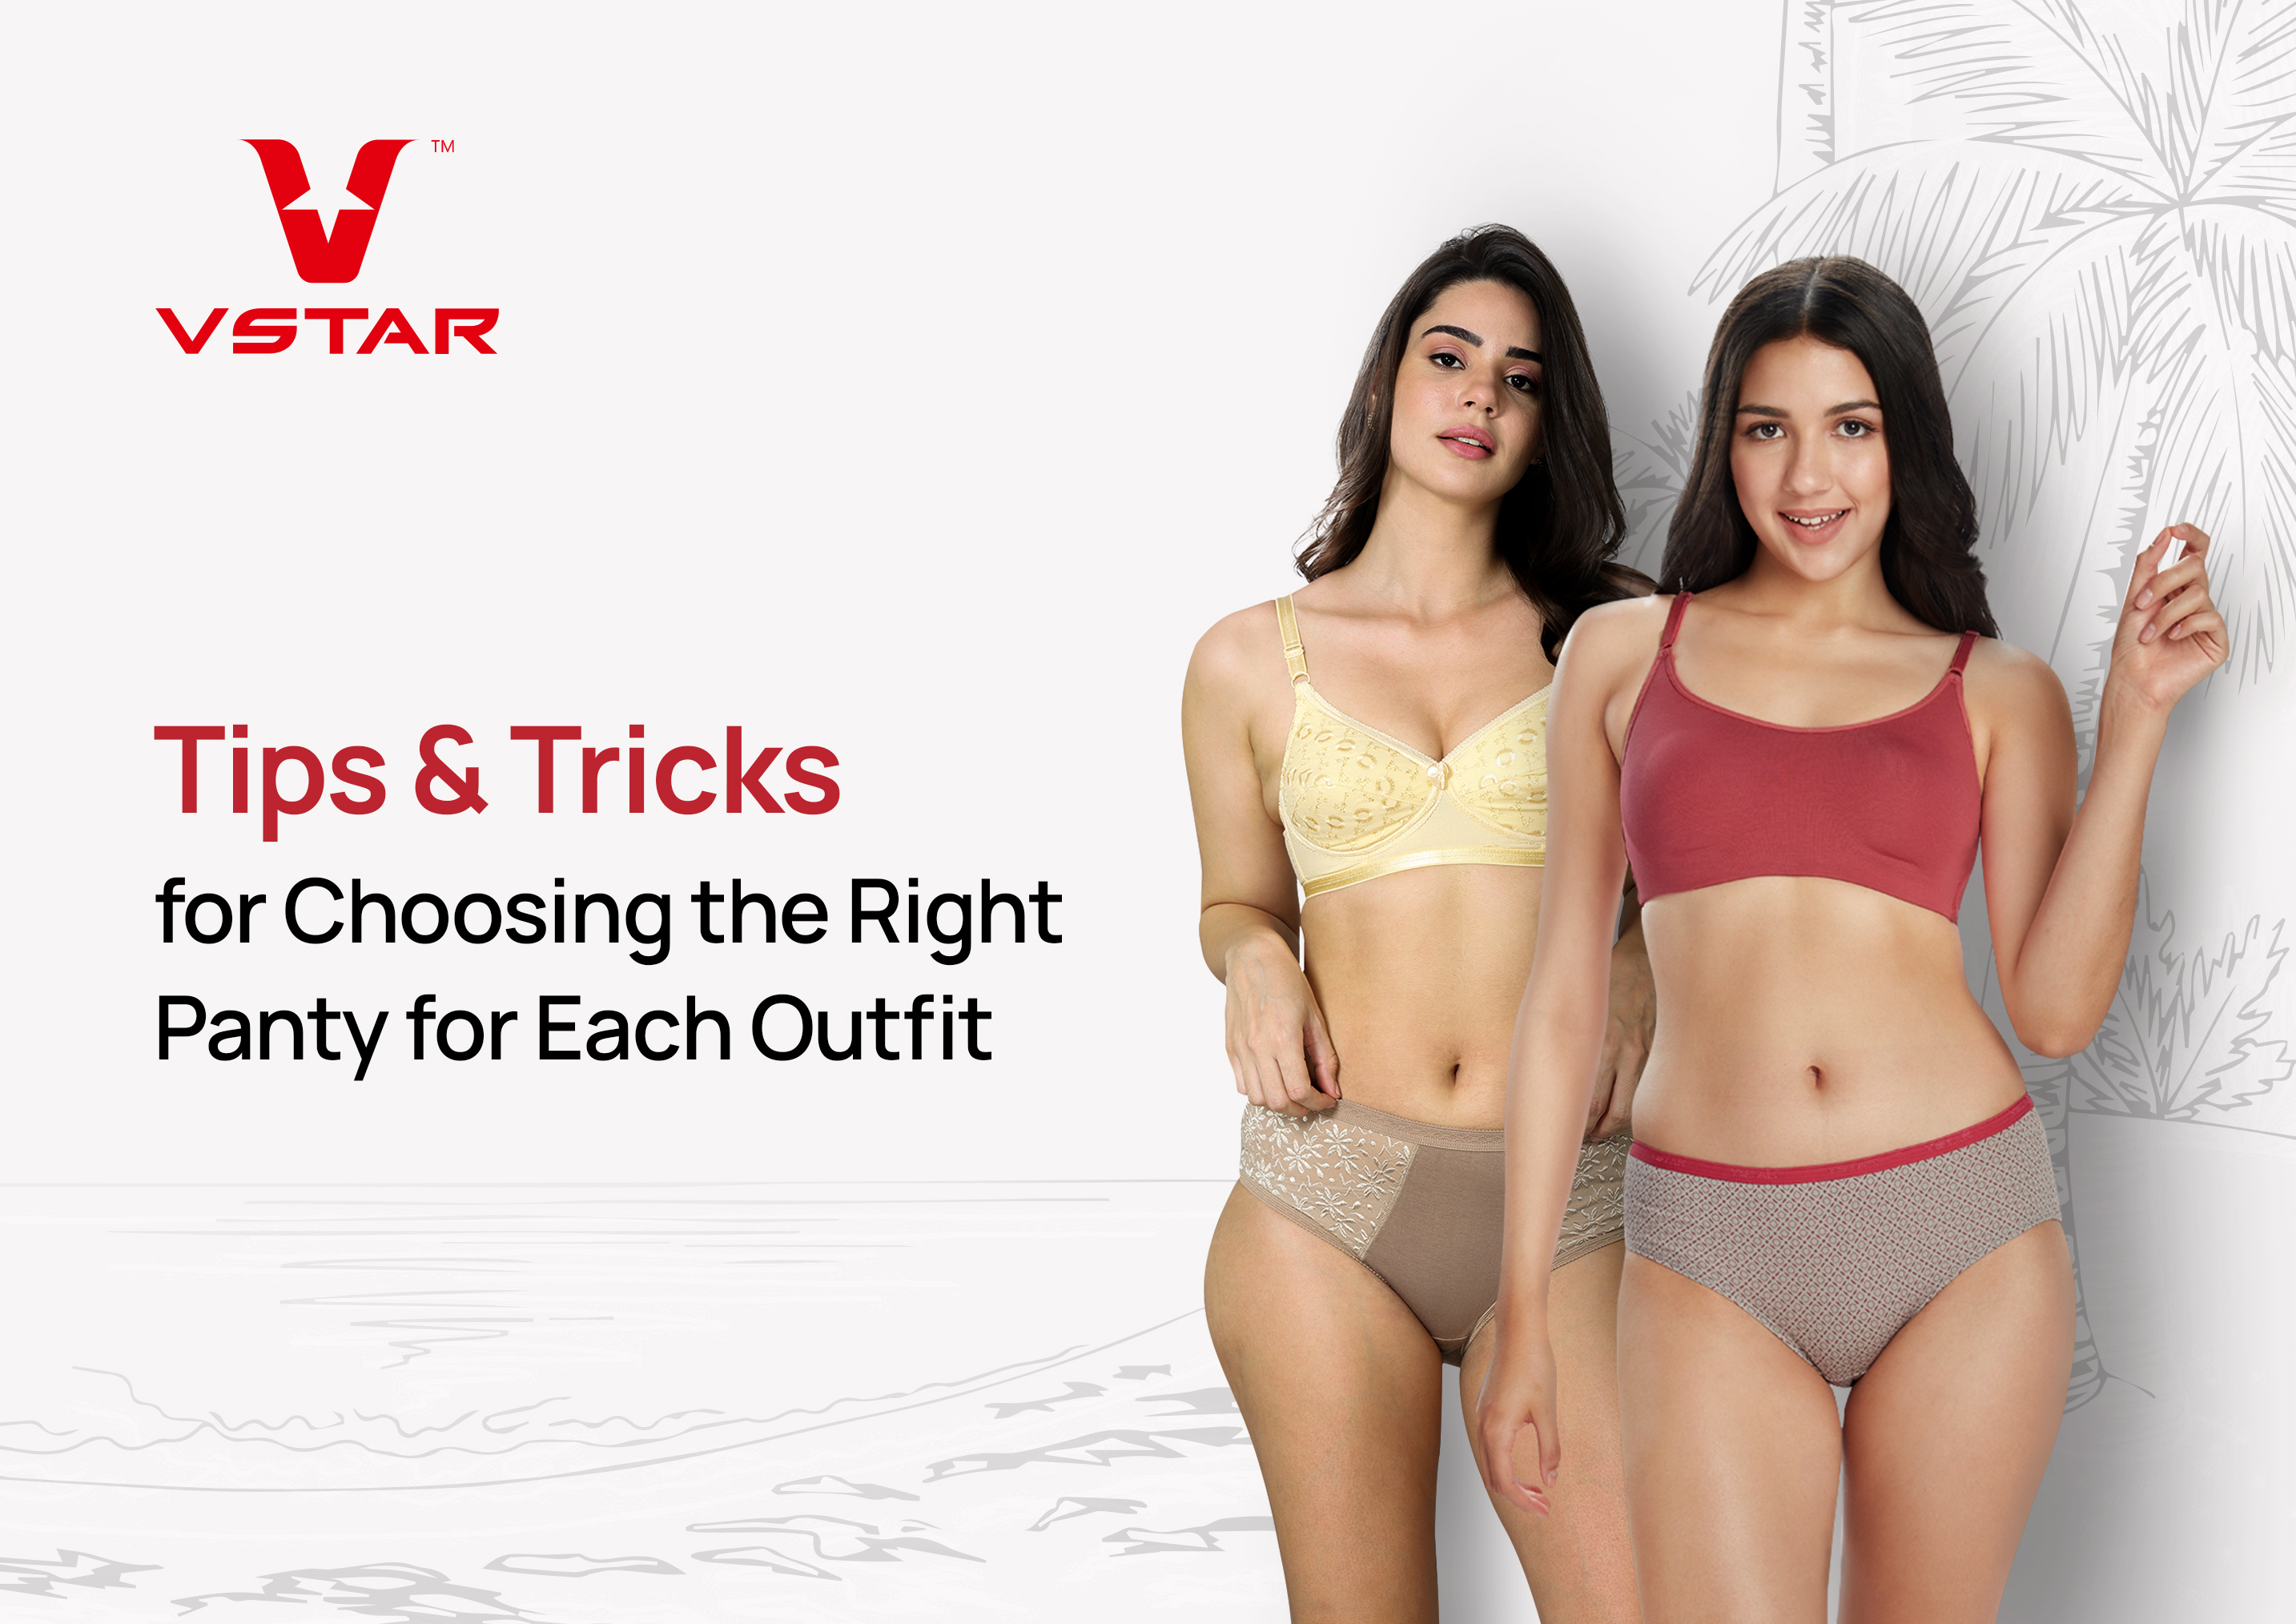 Tips & Tricks for Choosing the Right Panty for Each Outfit